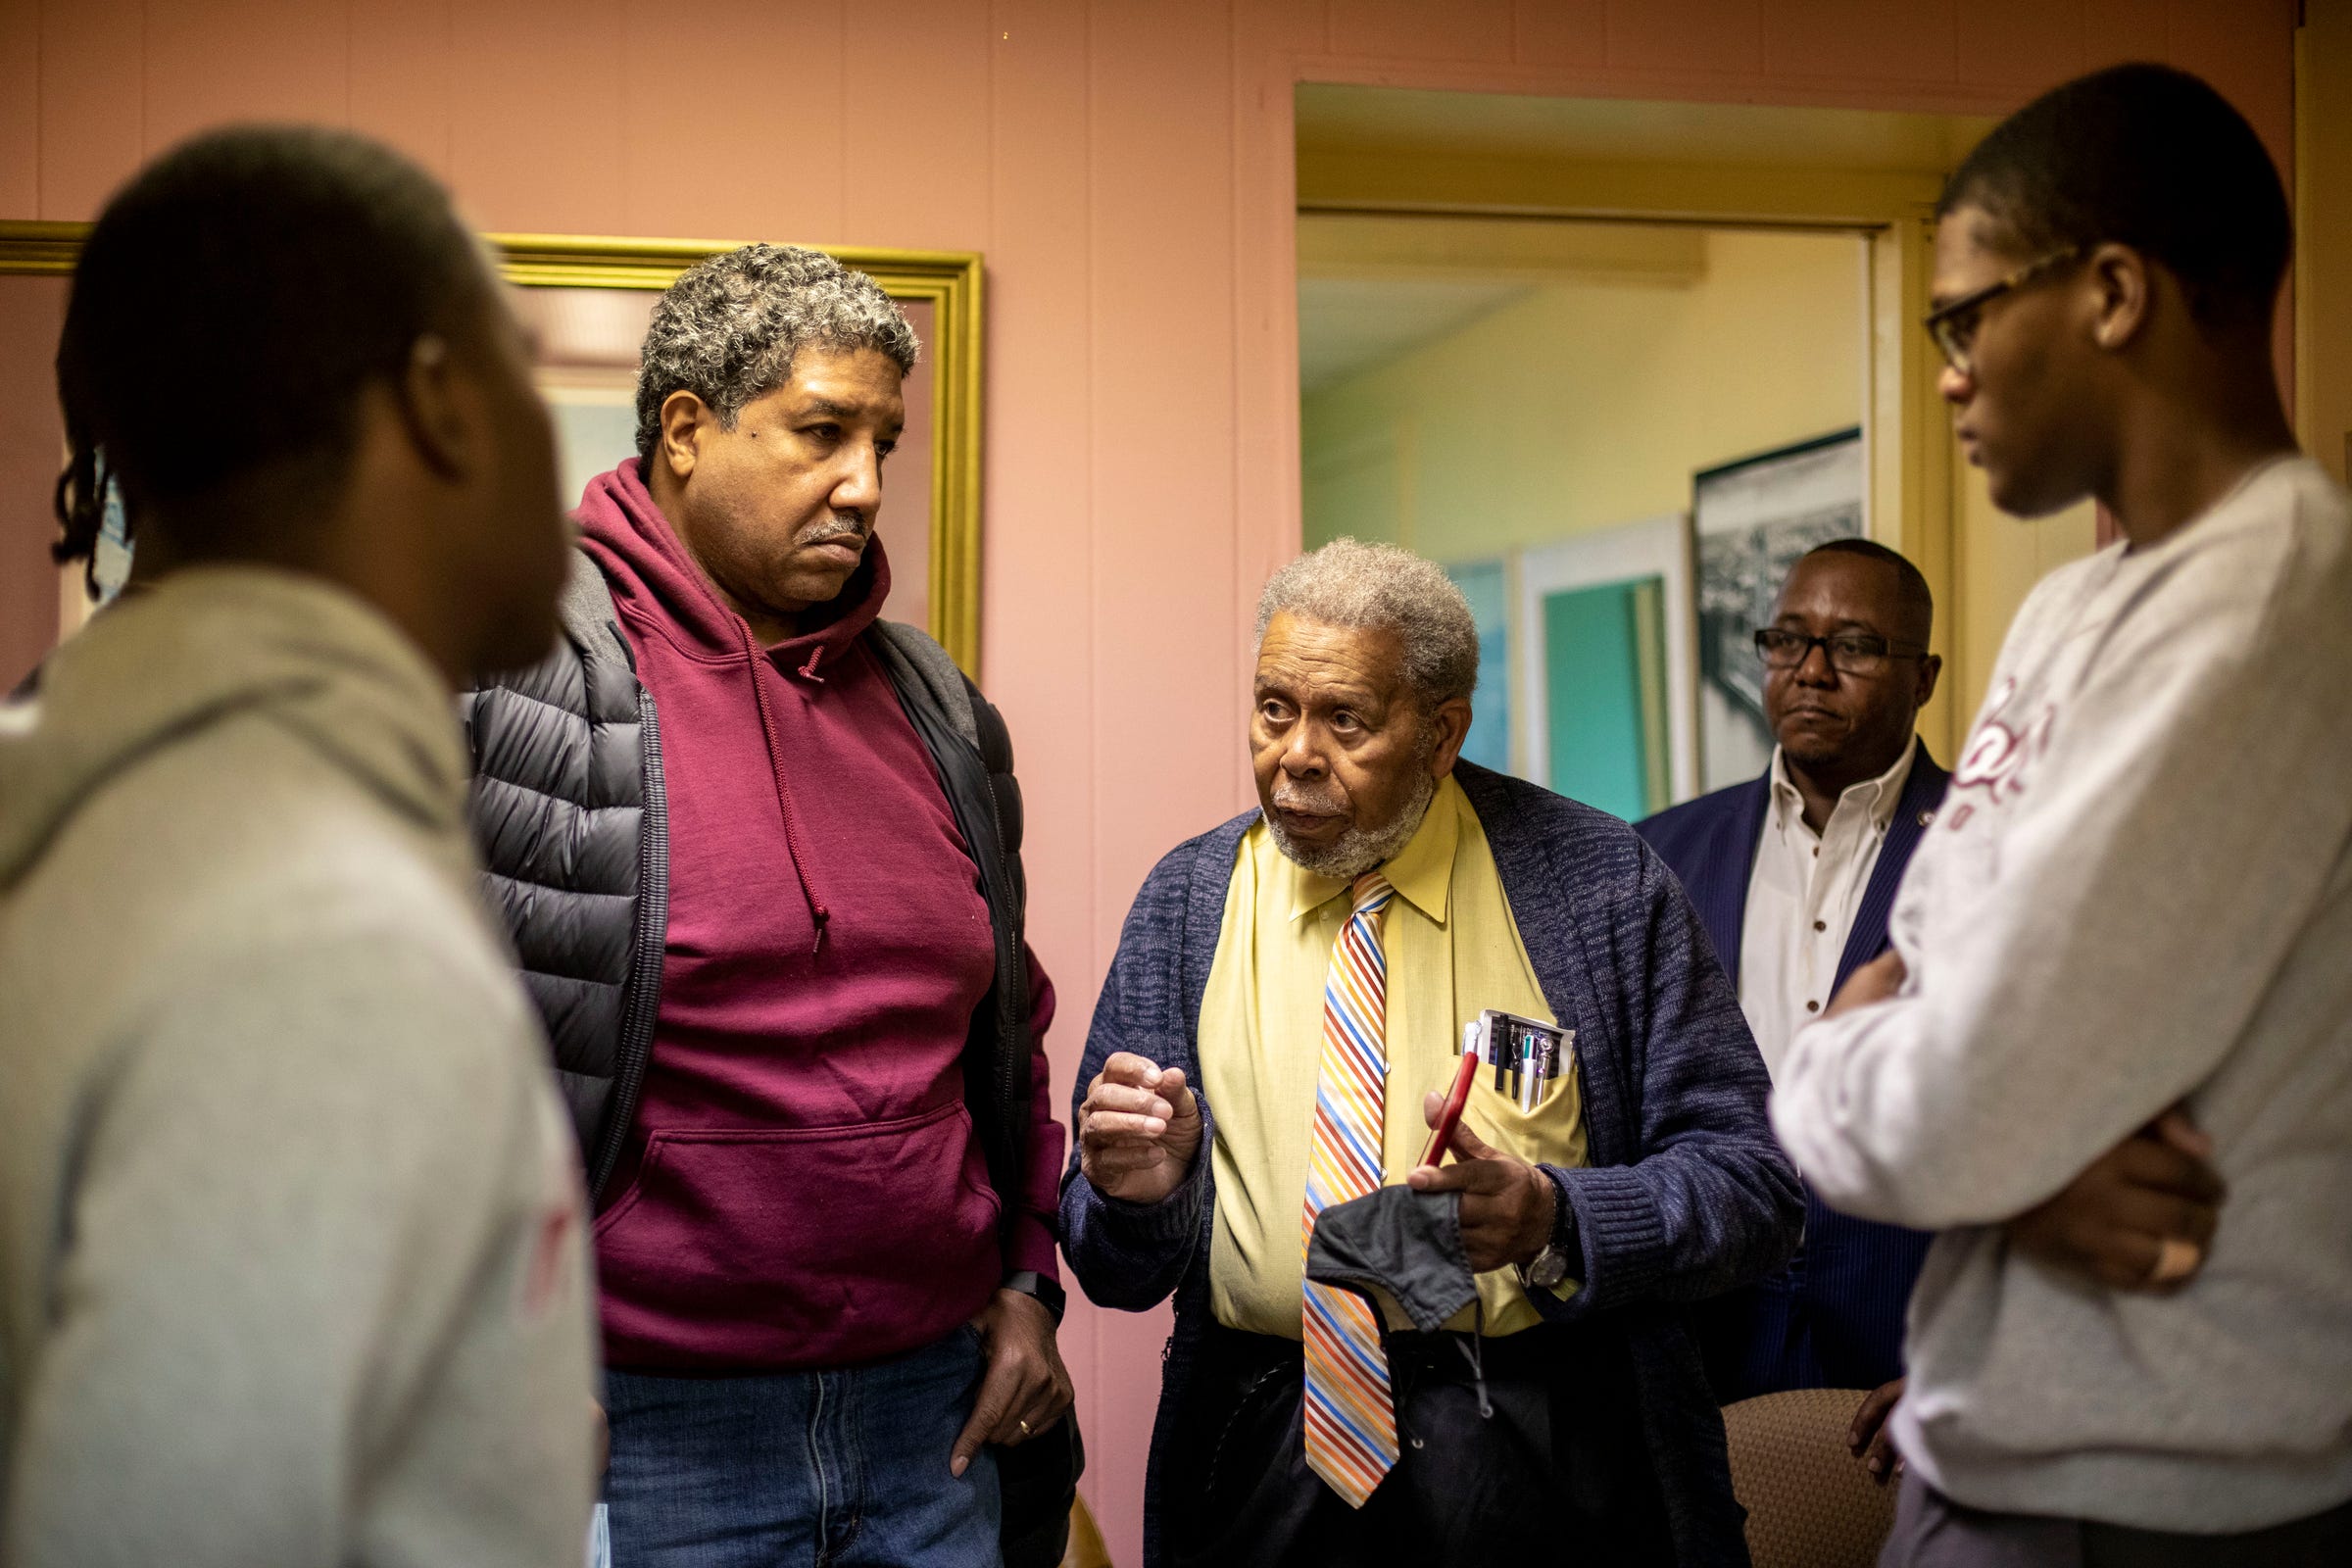 Dr. William Jackson, center, talks with some of his friends who are also Morehouse alums at his office in Detroit, MI on Friday, January 14, 2022. Jackson is a graduate of Morehouse College, the same college Dr. Martin Luther King Jr. attended. Jackson interacted with King and is still currently practicing medicine at age 89.